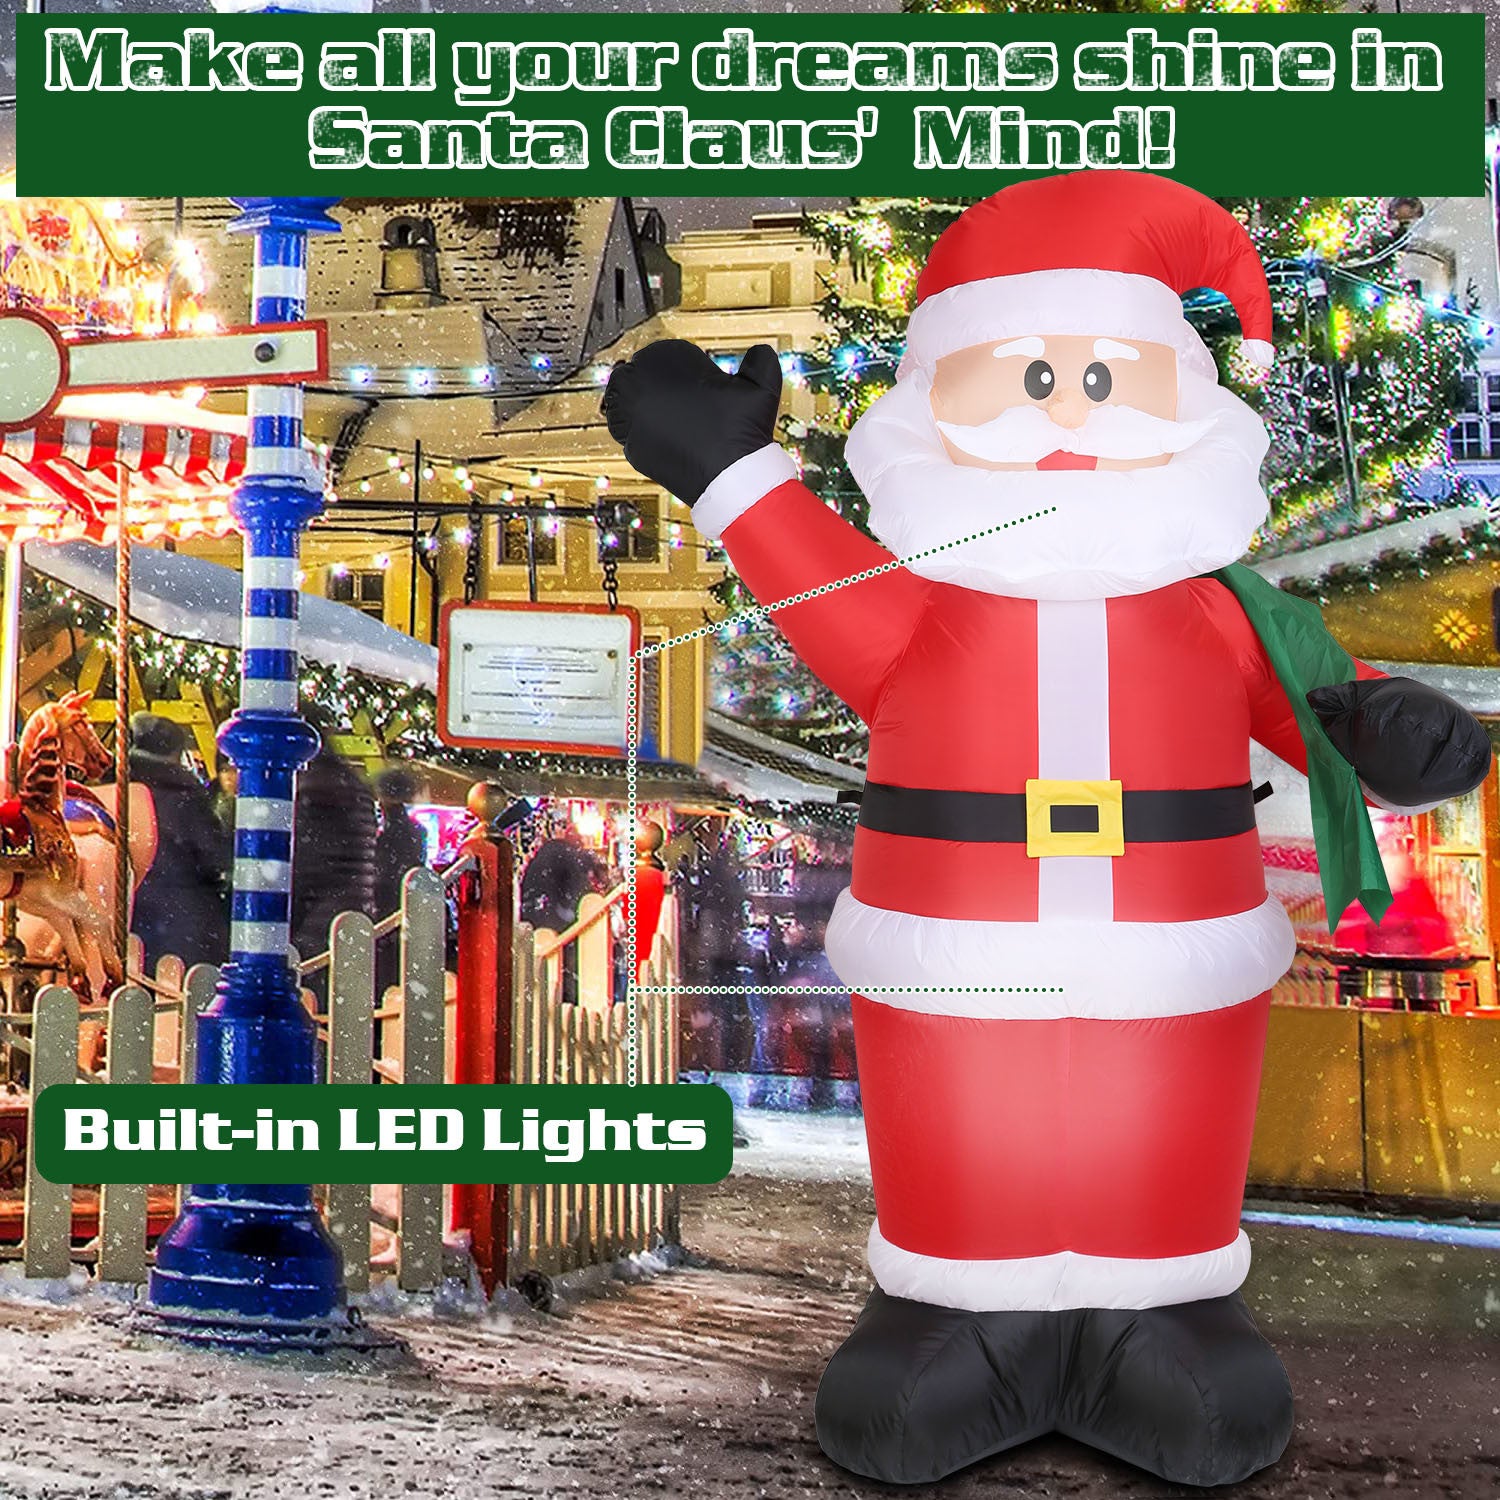 A group of 6.4ft Inflatable Christmas Giant Santa Claus Blow up Santa Claus with built-in blower and LED lights.